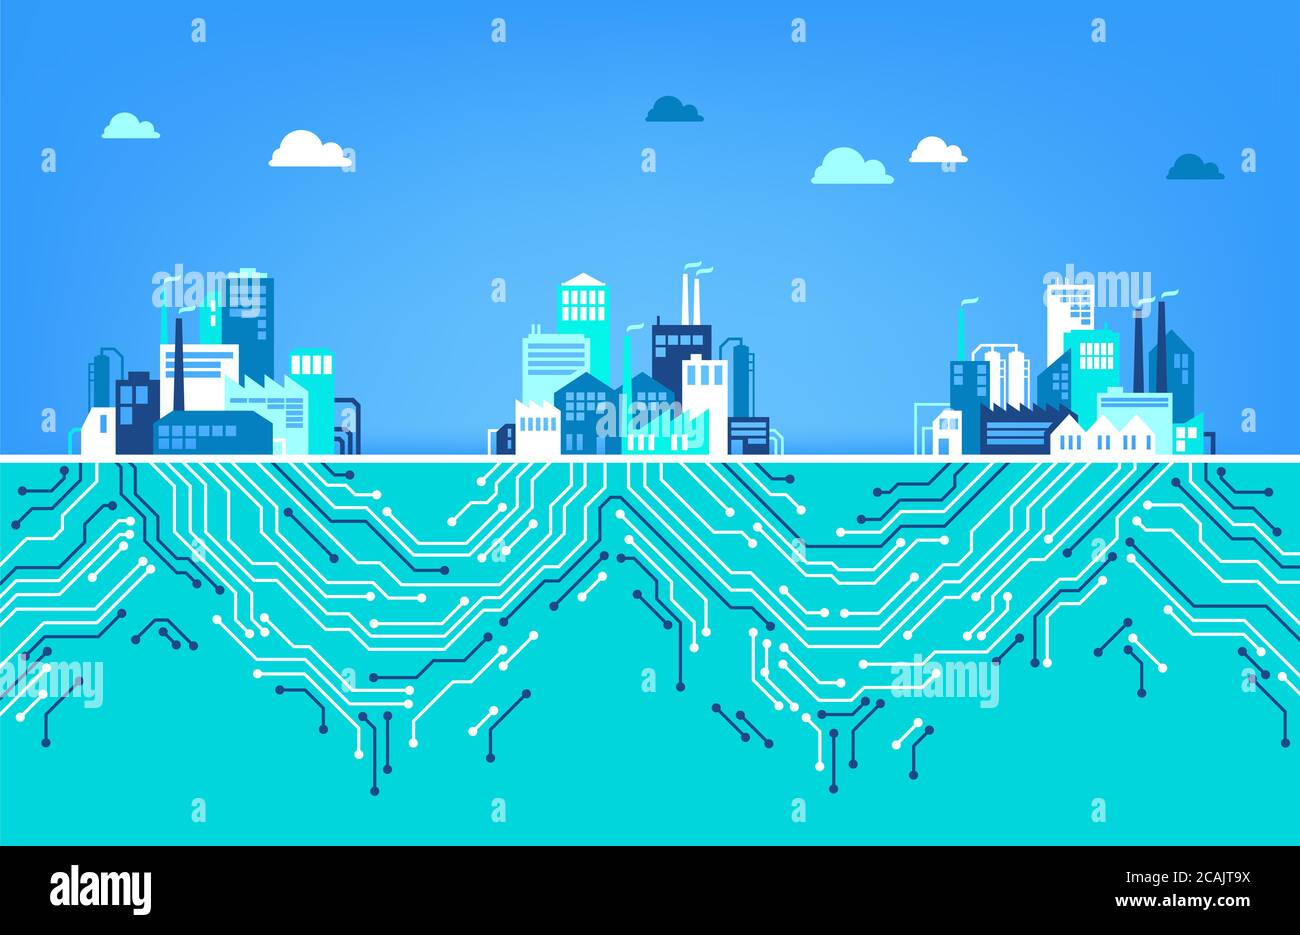 Digitalization concept / IOT / digital transformation: three factories, connected by digital circuits Stock Photo